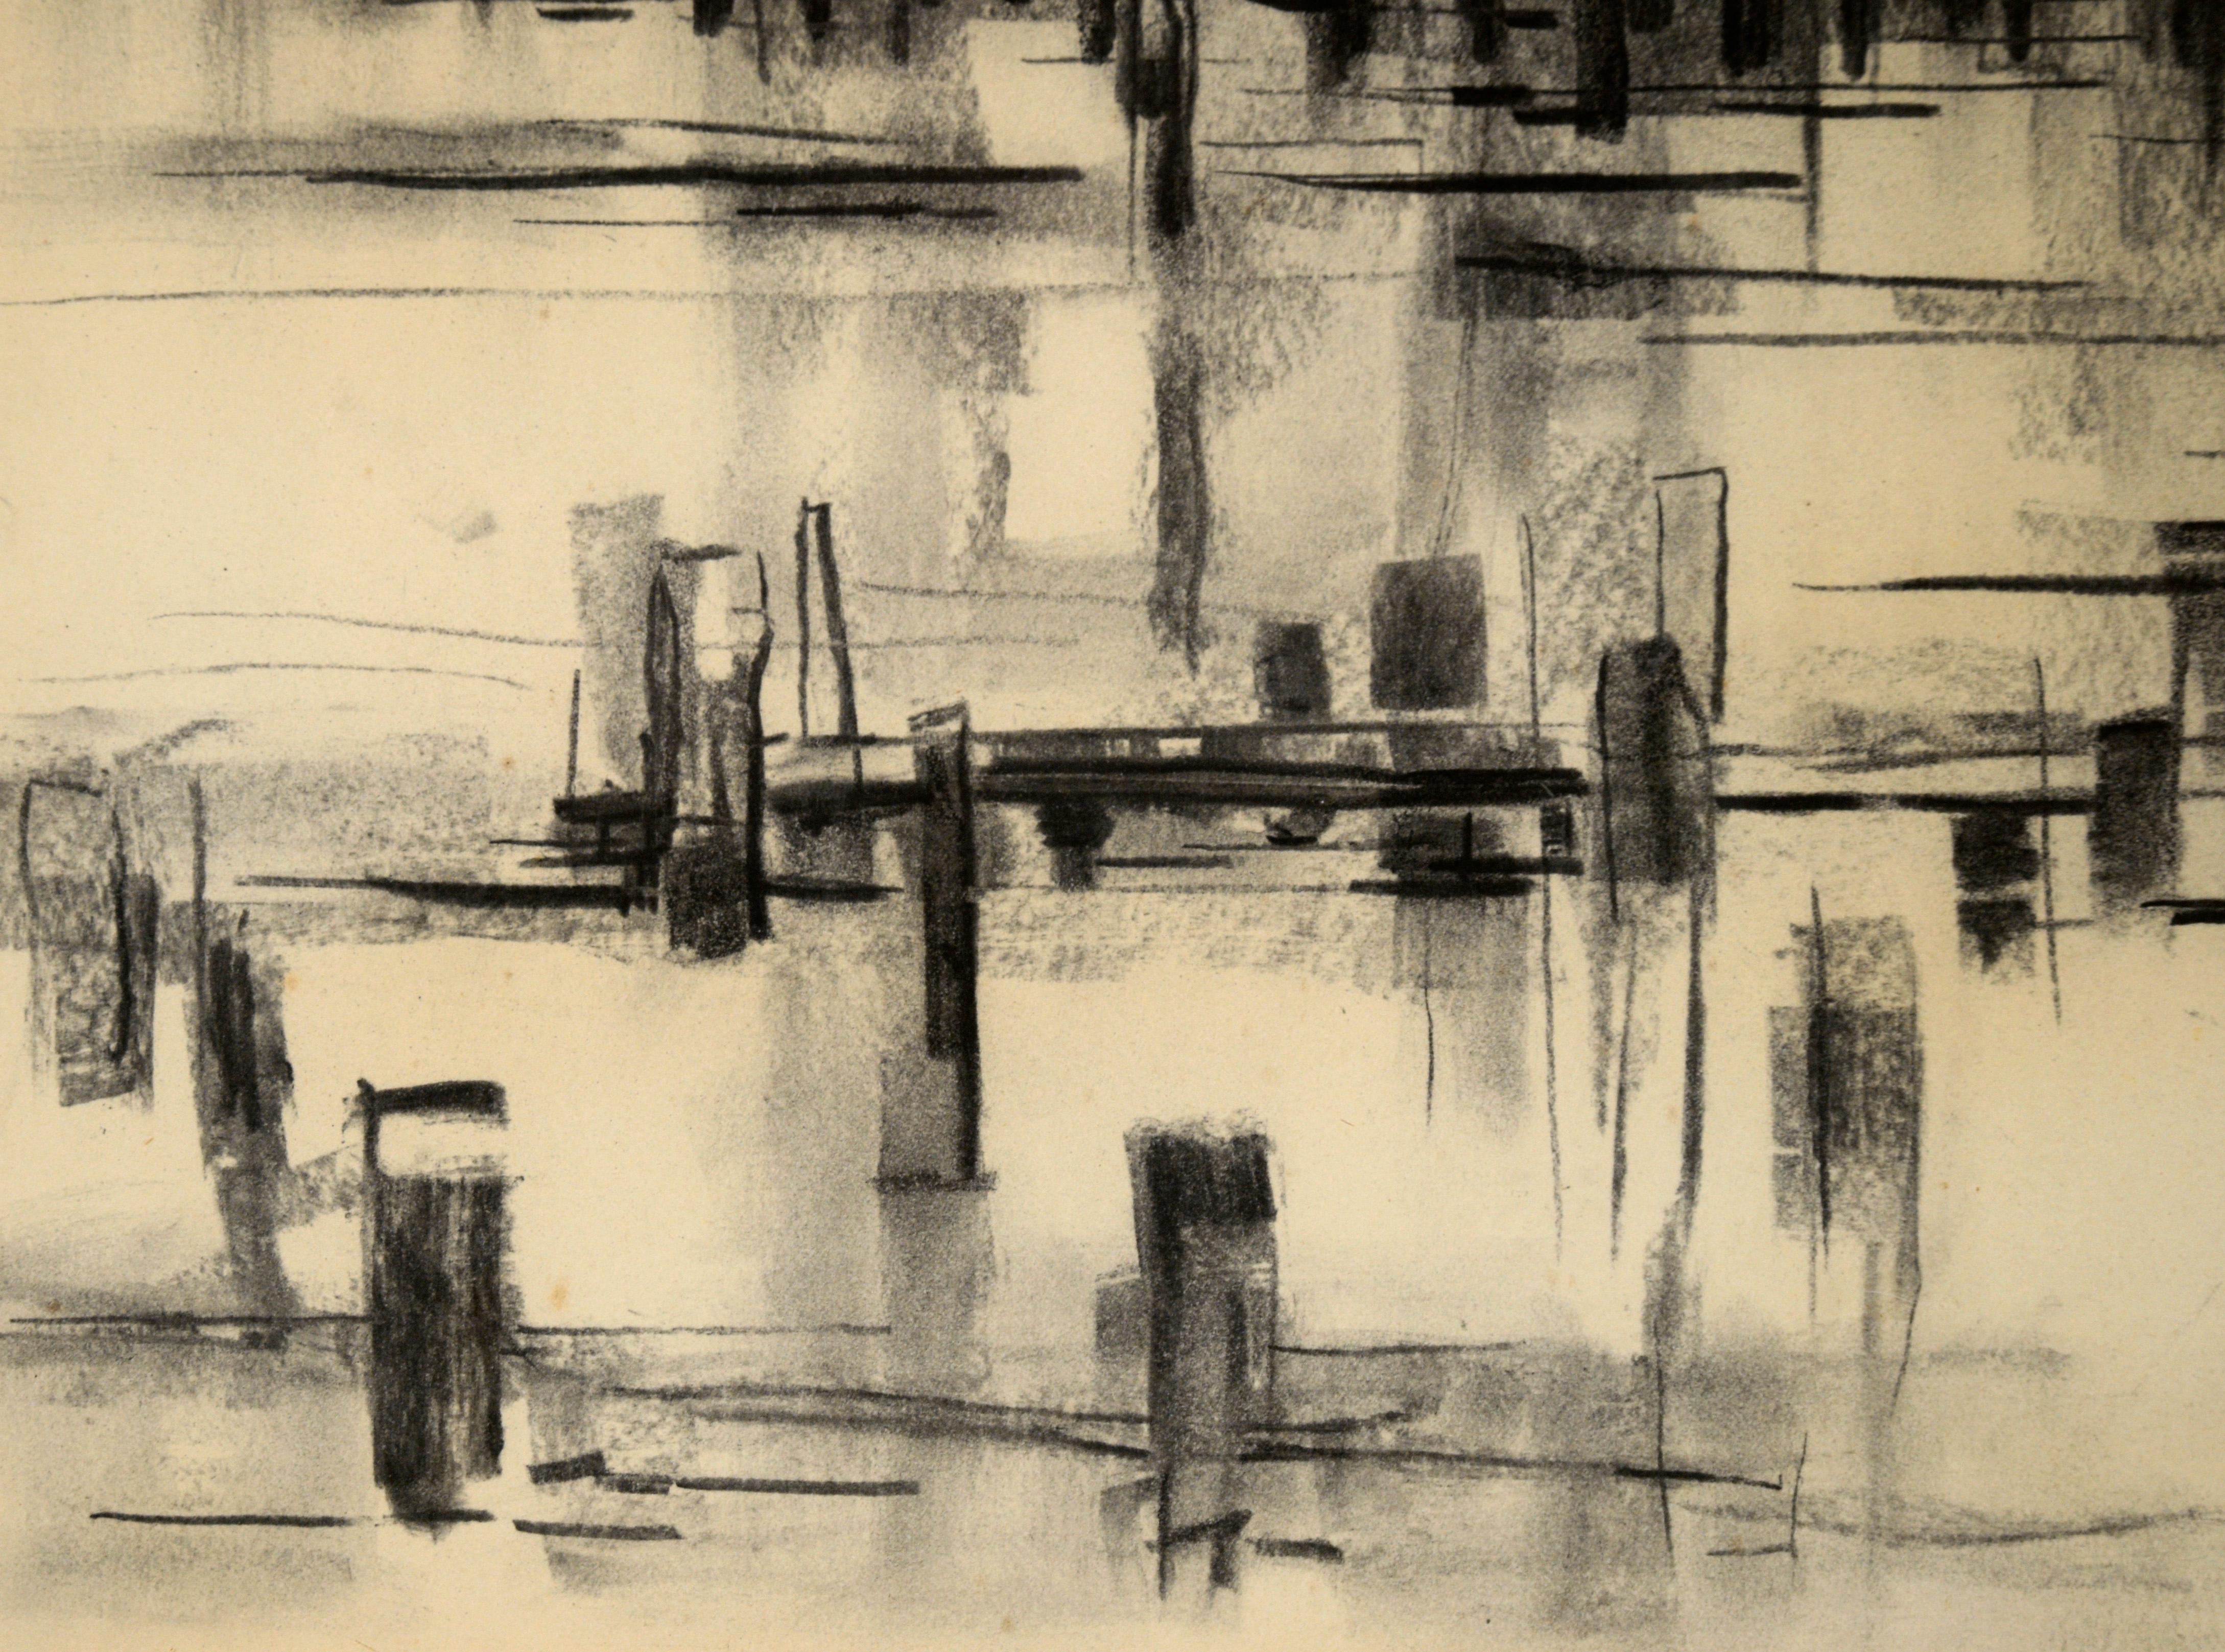 Ships at the Harbor - Nautical Seascape with Seagulls in Charcoal on Paper For Sale 2